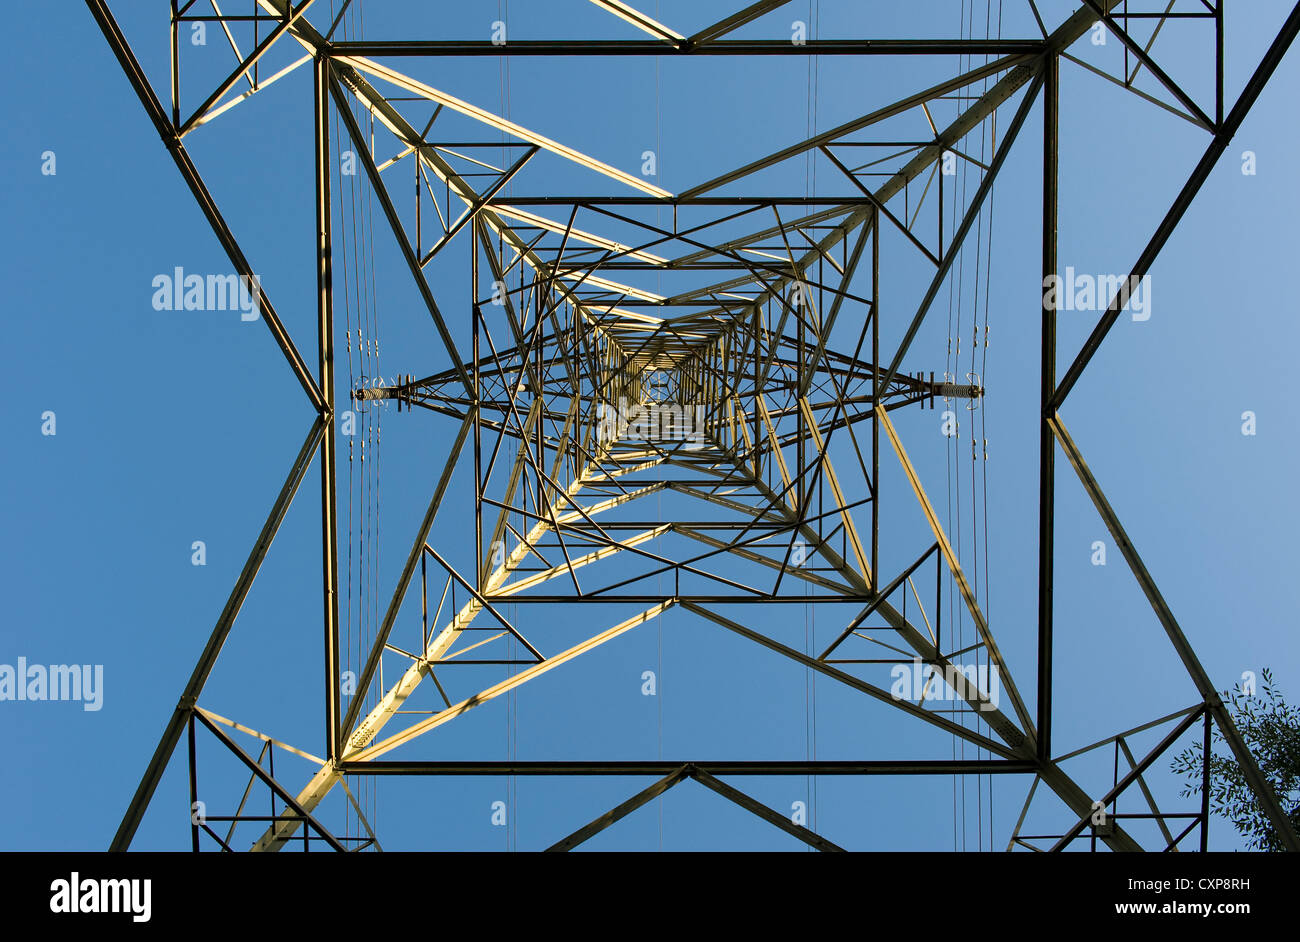 symmetrical electricity pylon from below against a blue sky Stock Photo